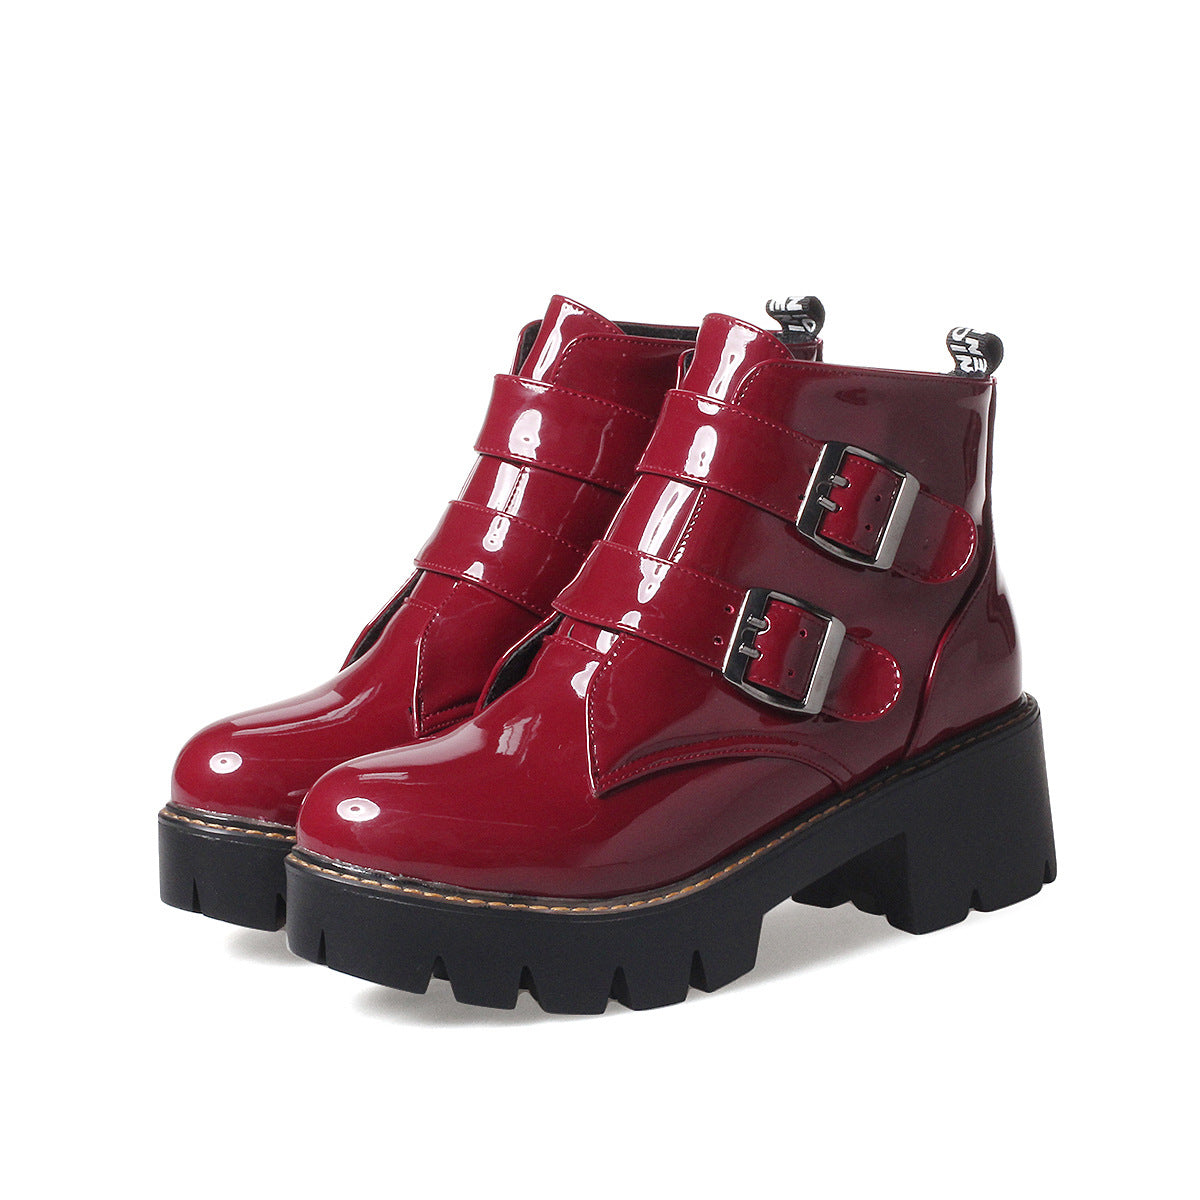 Autumn and Winter Patent Leather Short Boots Buckle Ankle Boots Women Shoes